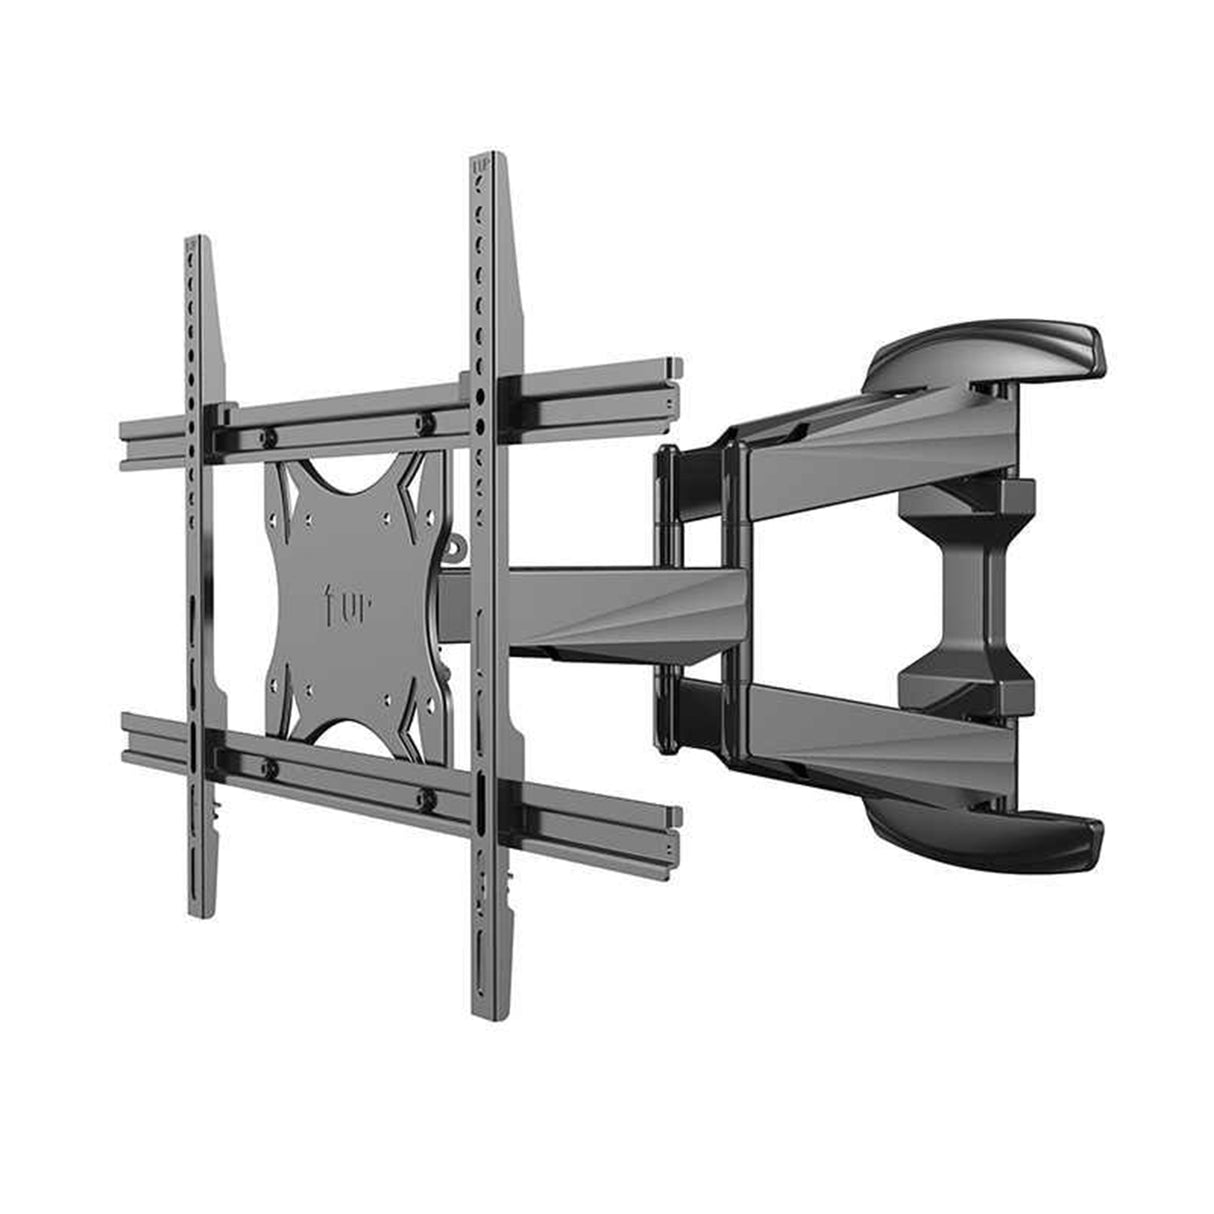 TV Mount NB- P4 Full Motion Cantilever TV Mount, 32 to 55 inches Support /400 x 400 mm